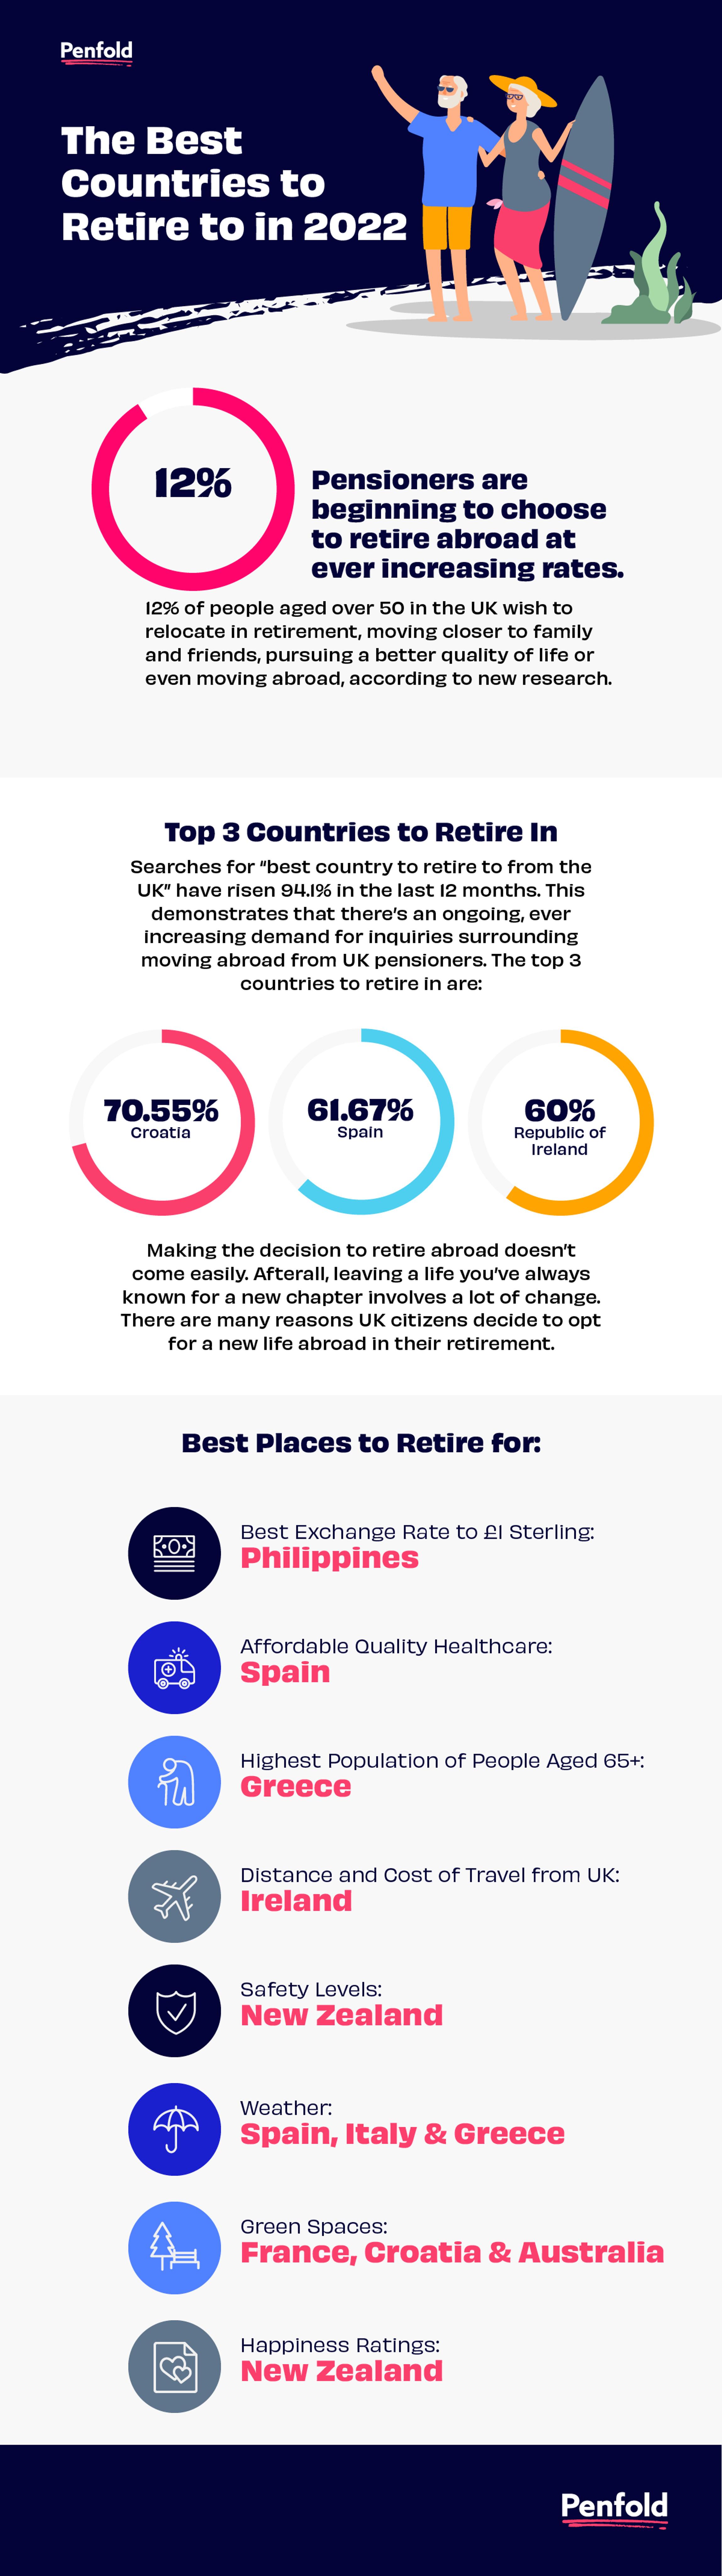 infographic showing the best countries to retire to in 2022